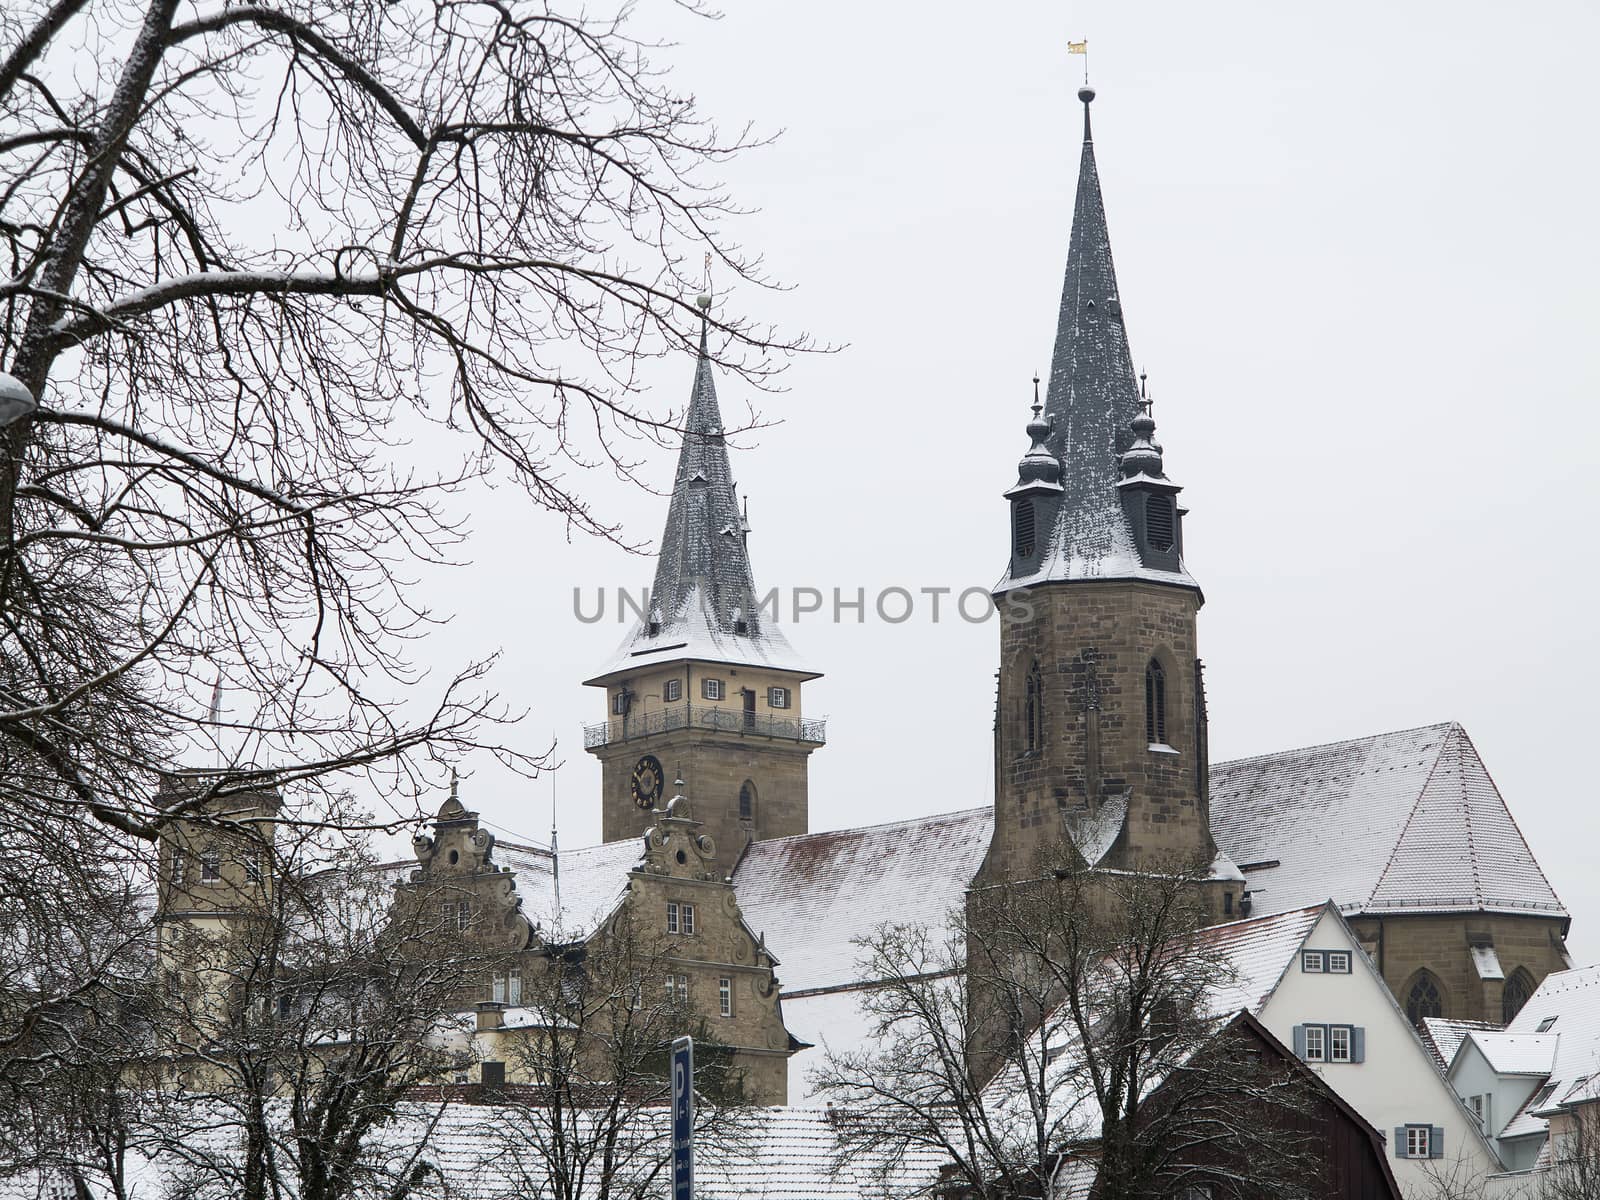 Cityview of the town Oehringen in Germany in winter by Kasparart